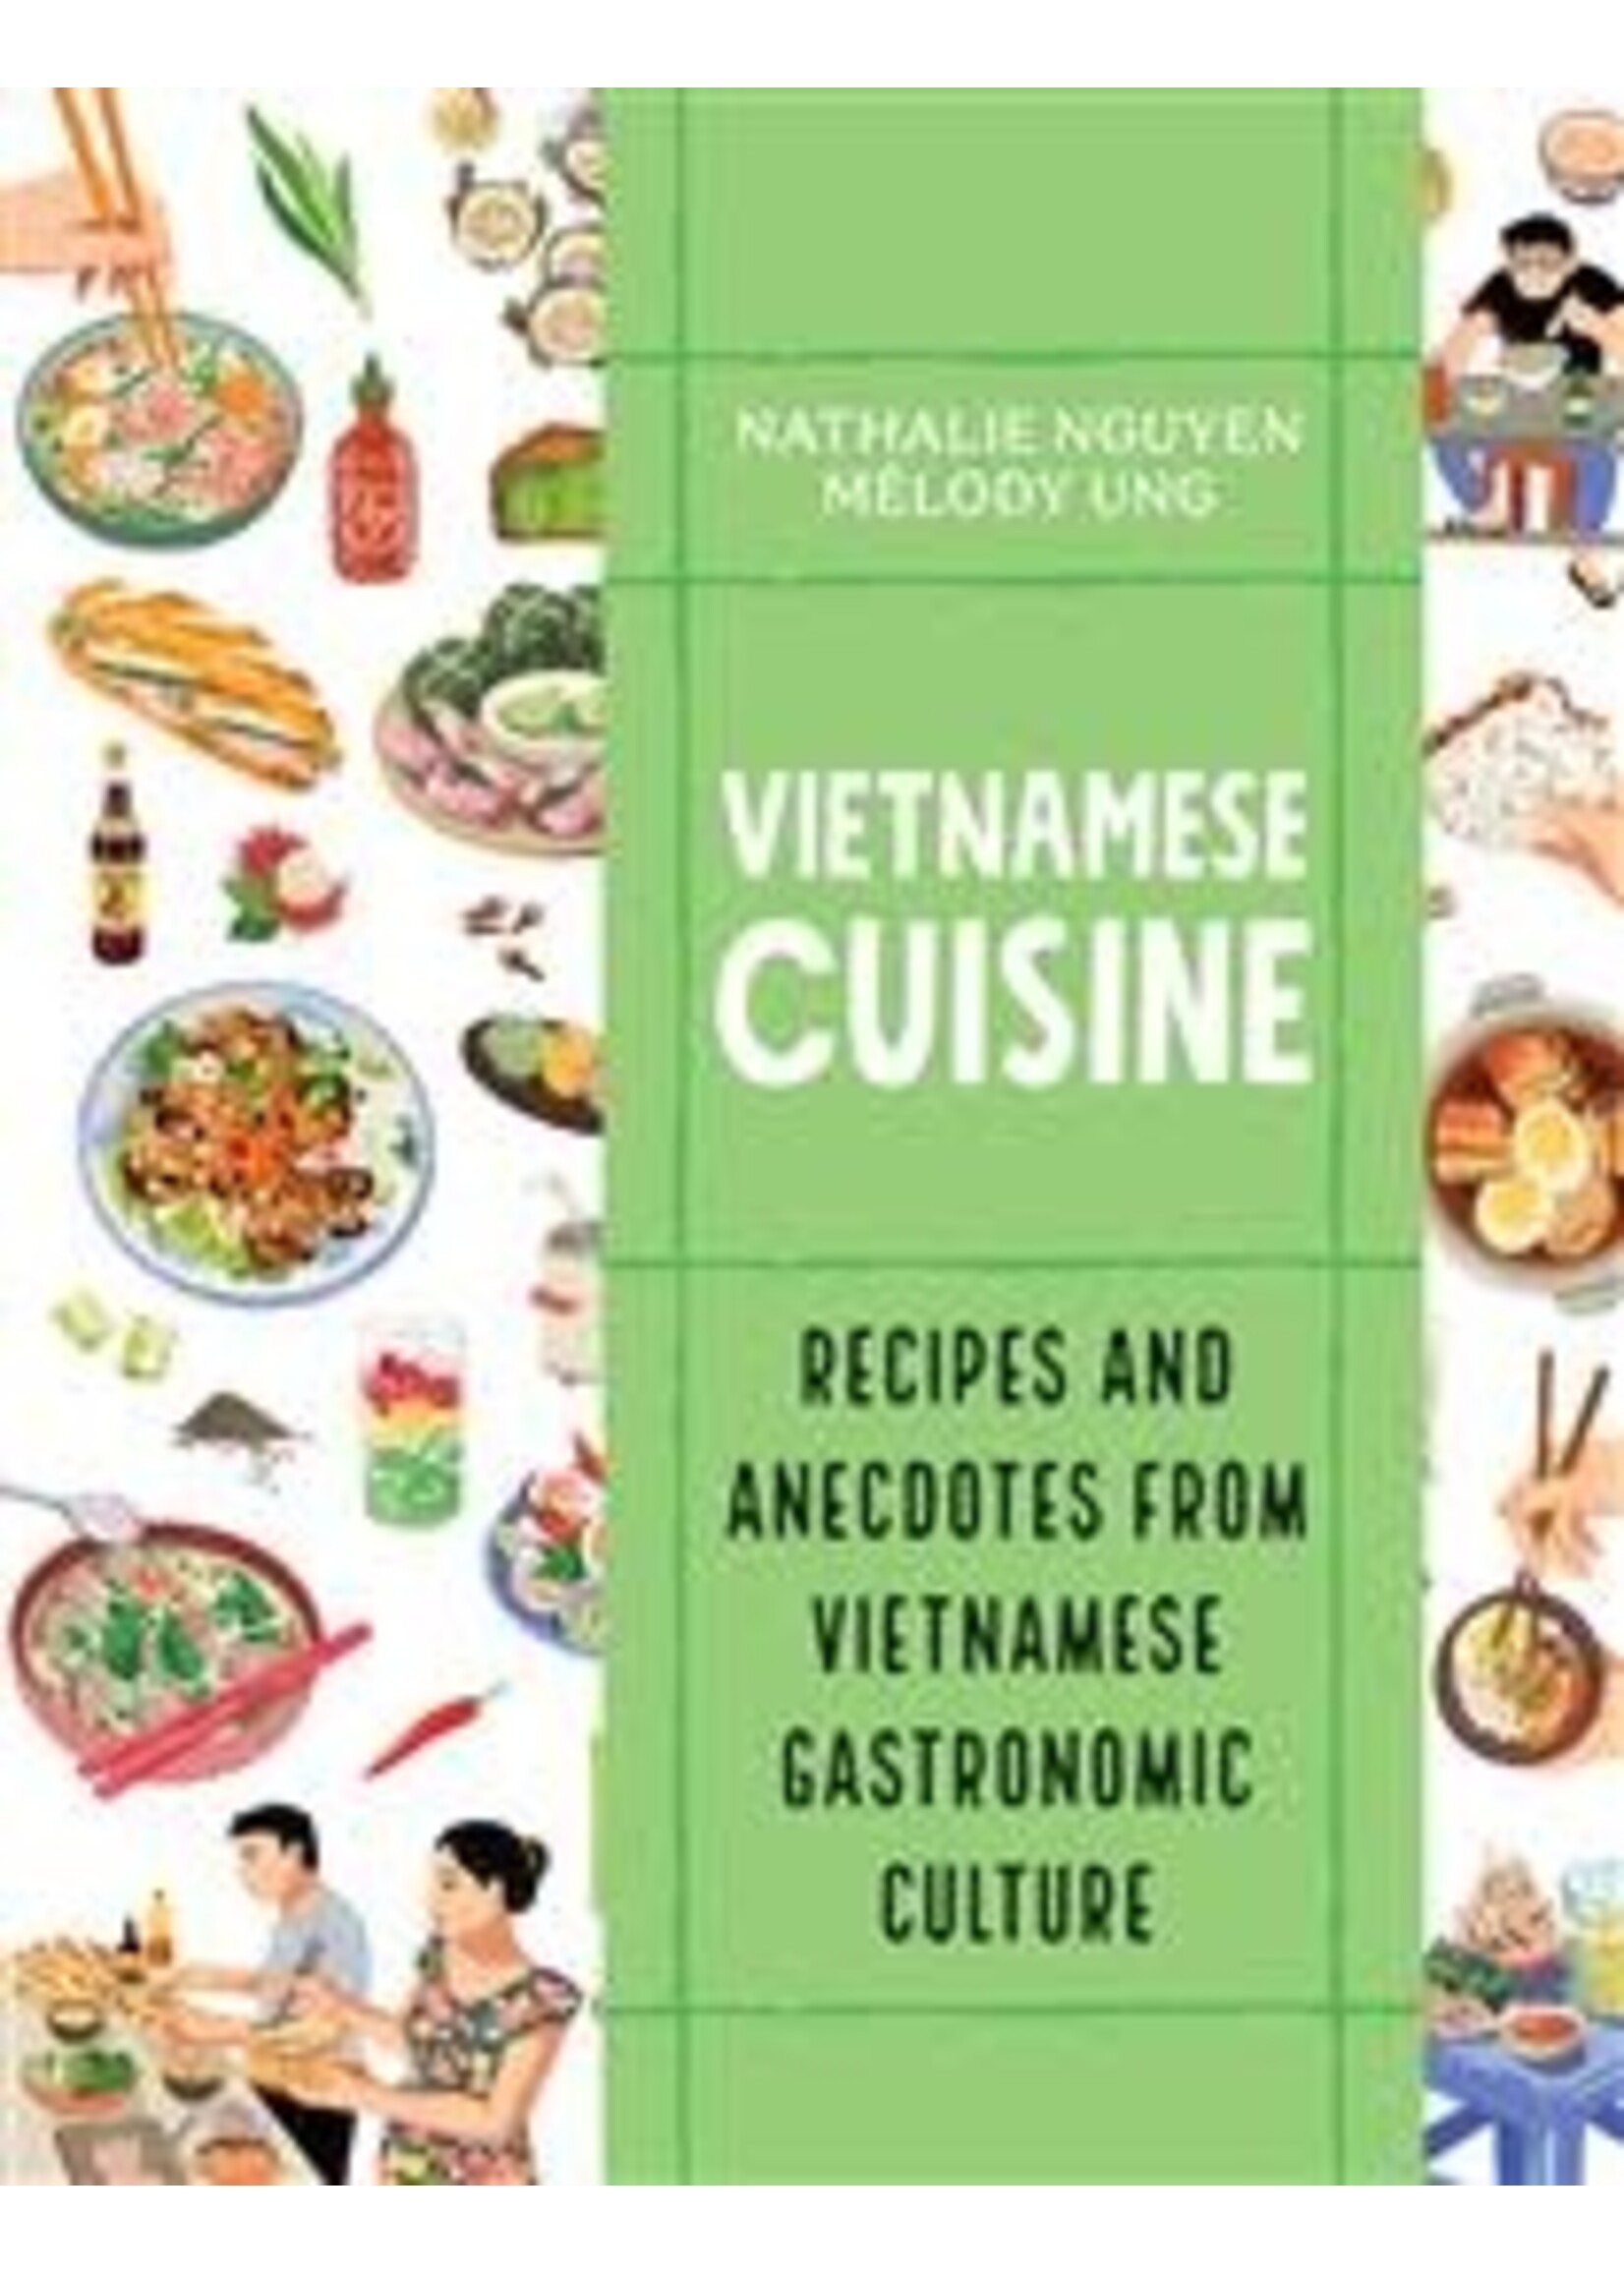 Vietnamese Cuisine: Recipes and Anecdotes from Vietnamese Gastronomic Culture by Nathalie Nguyen, Mélody Ung